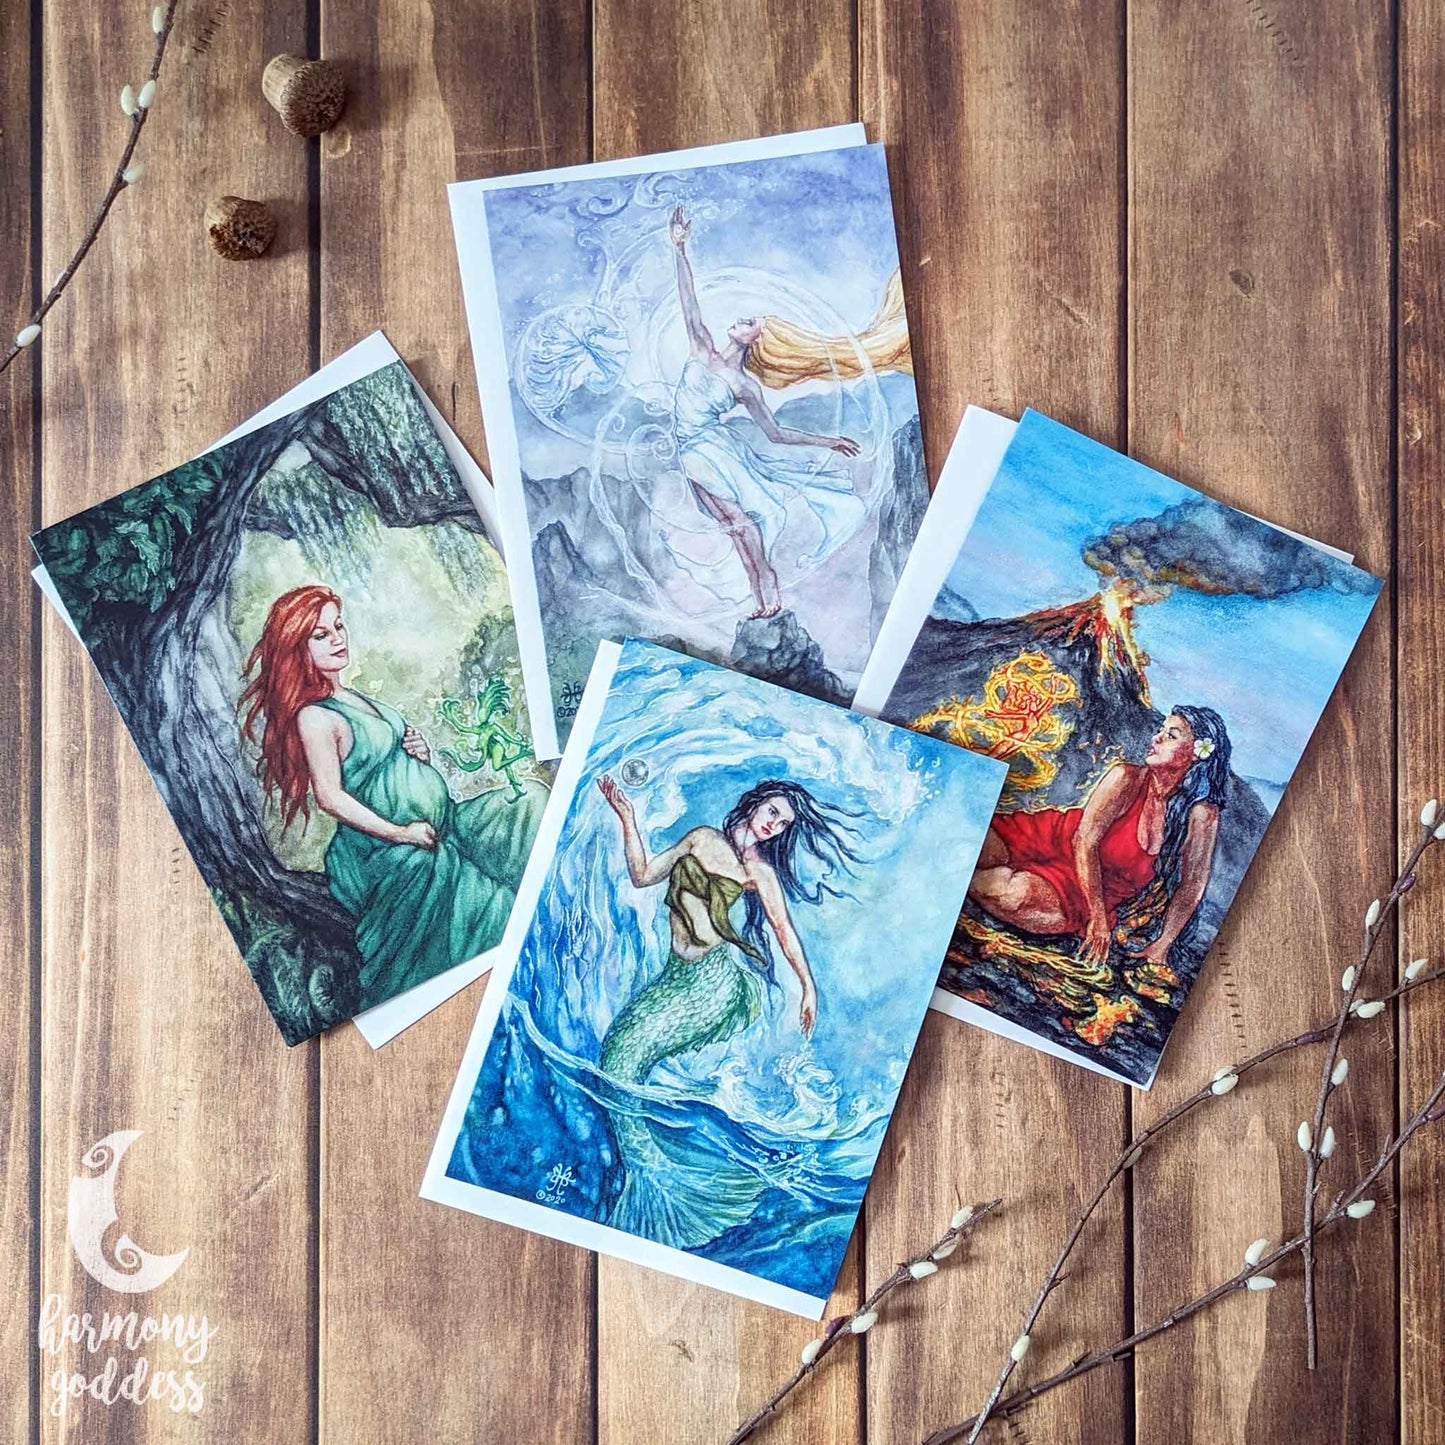 mother goddess art greeting card set of four 5x7 with envelope on rustic wooden background harmony goddess moon logo watermark